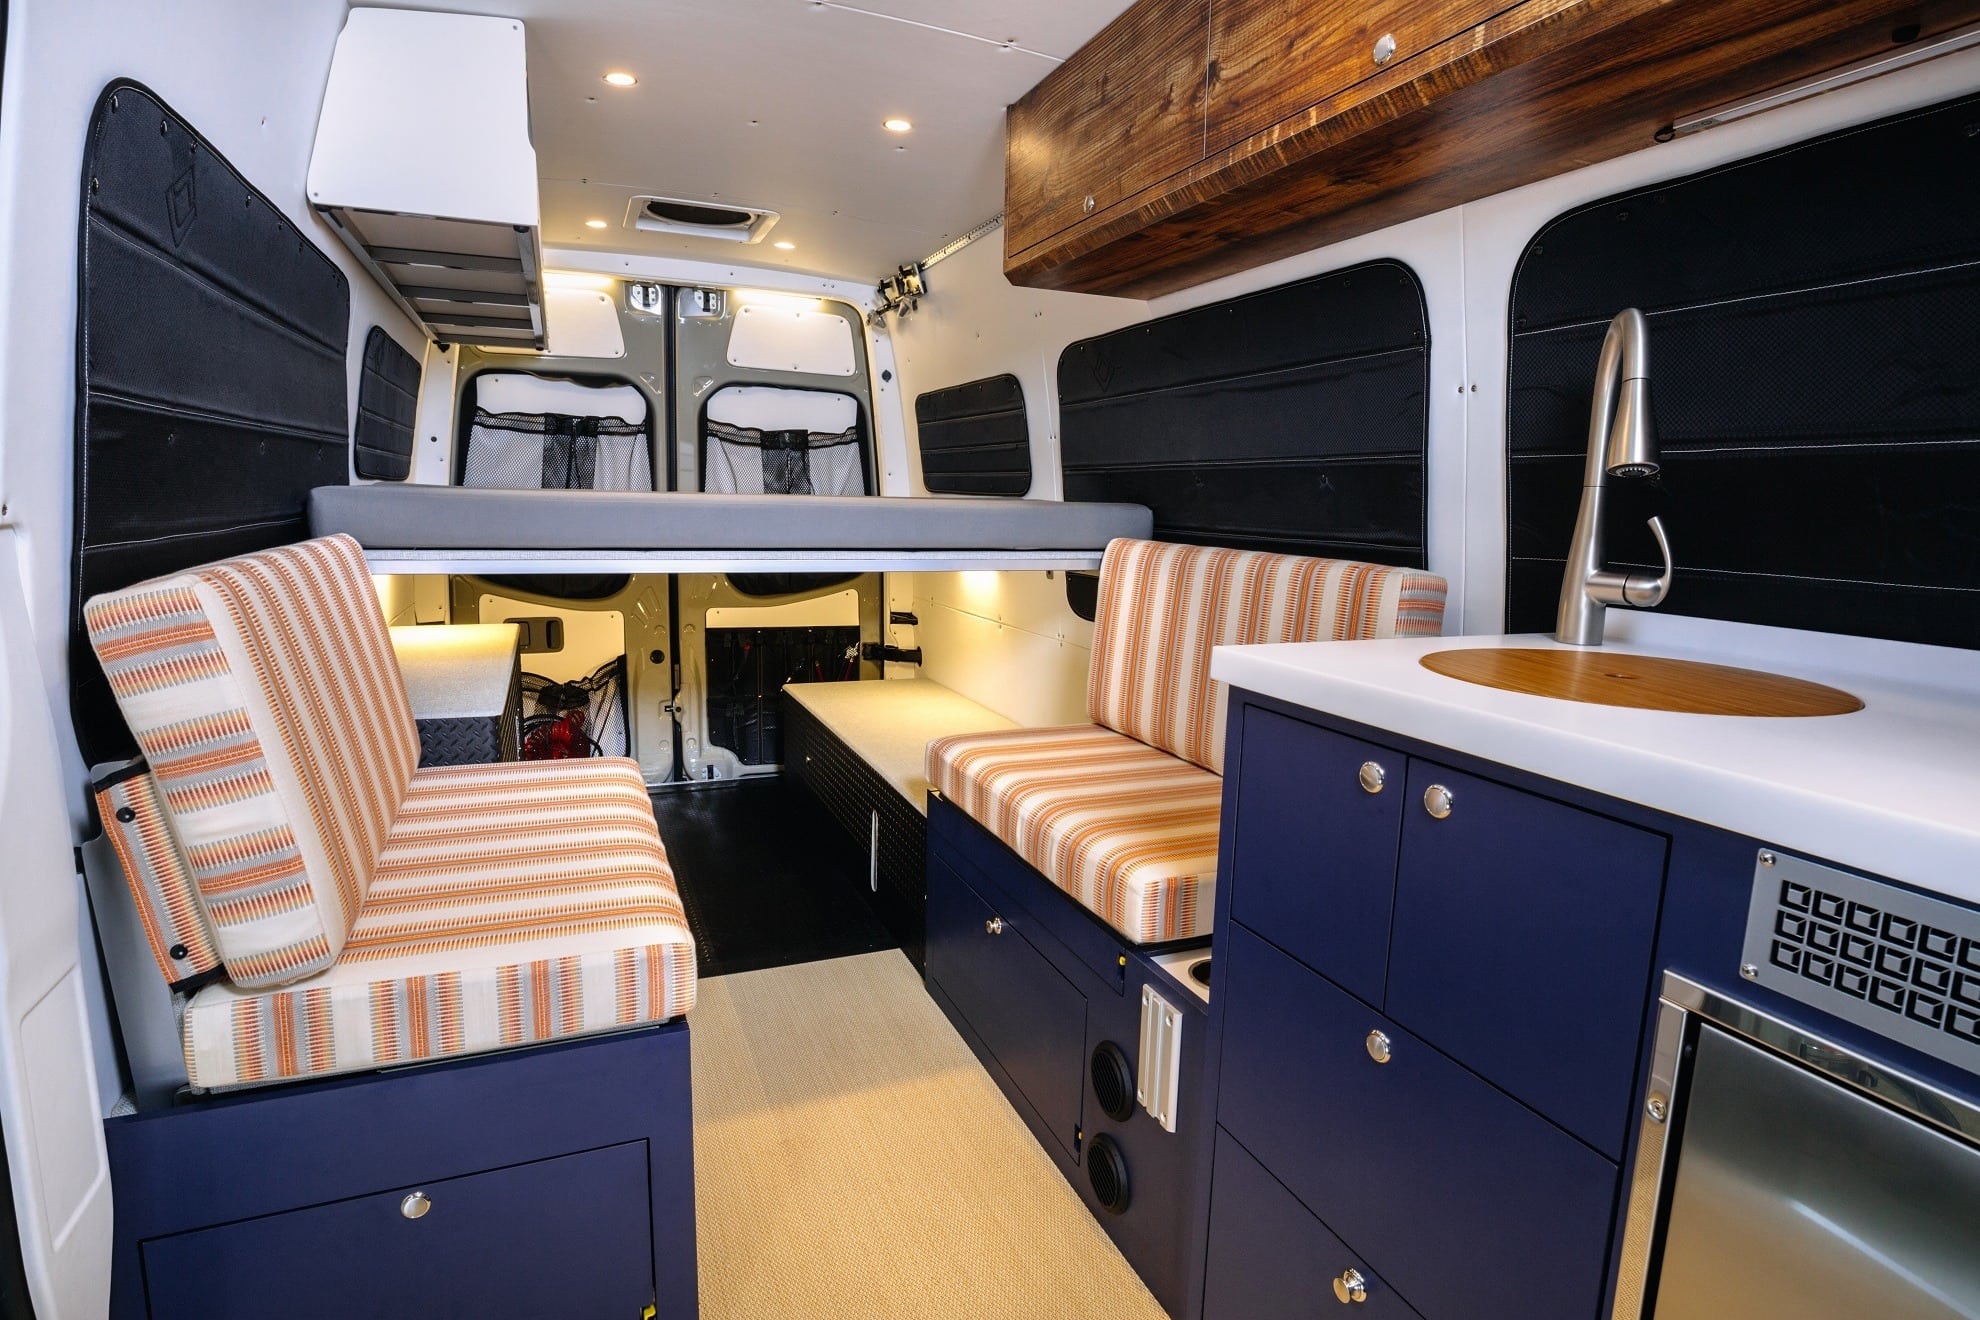 Get advice for planning your camper van conversion layout based on your personal priorities, so you end up with a functional van floor plan.